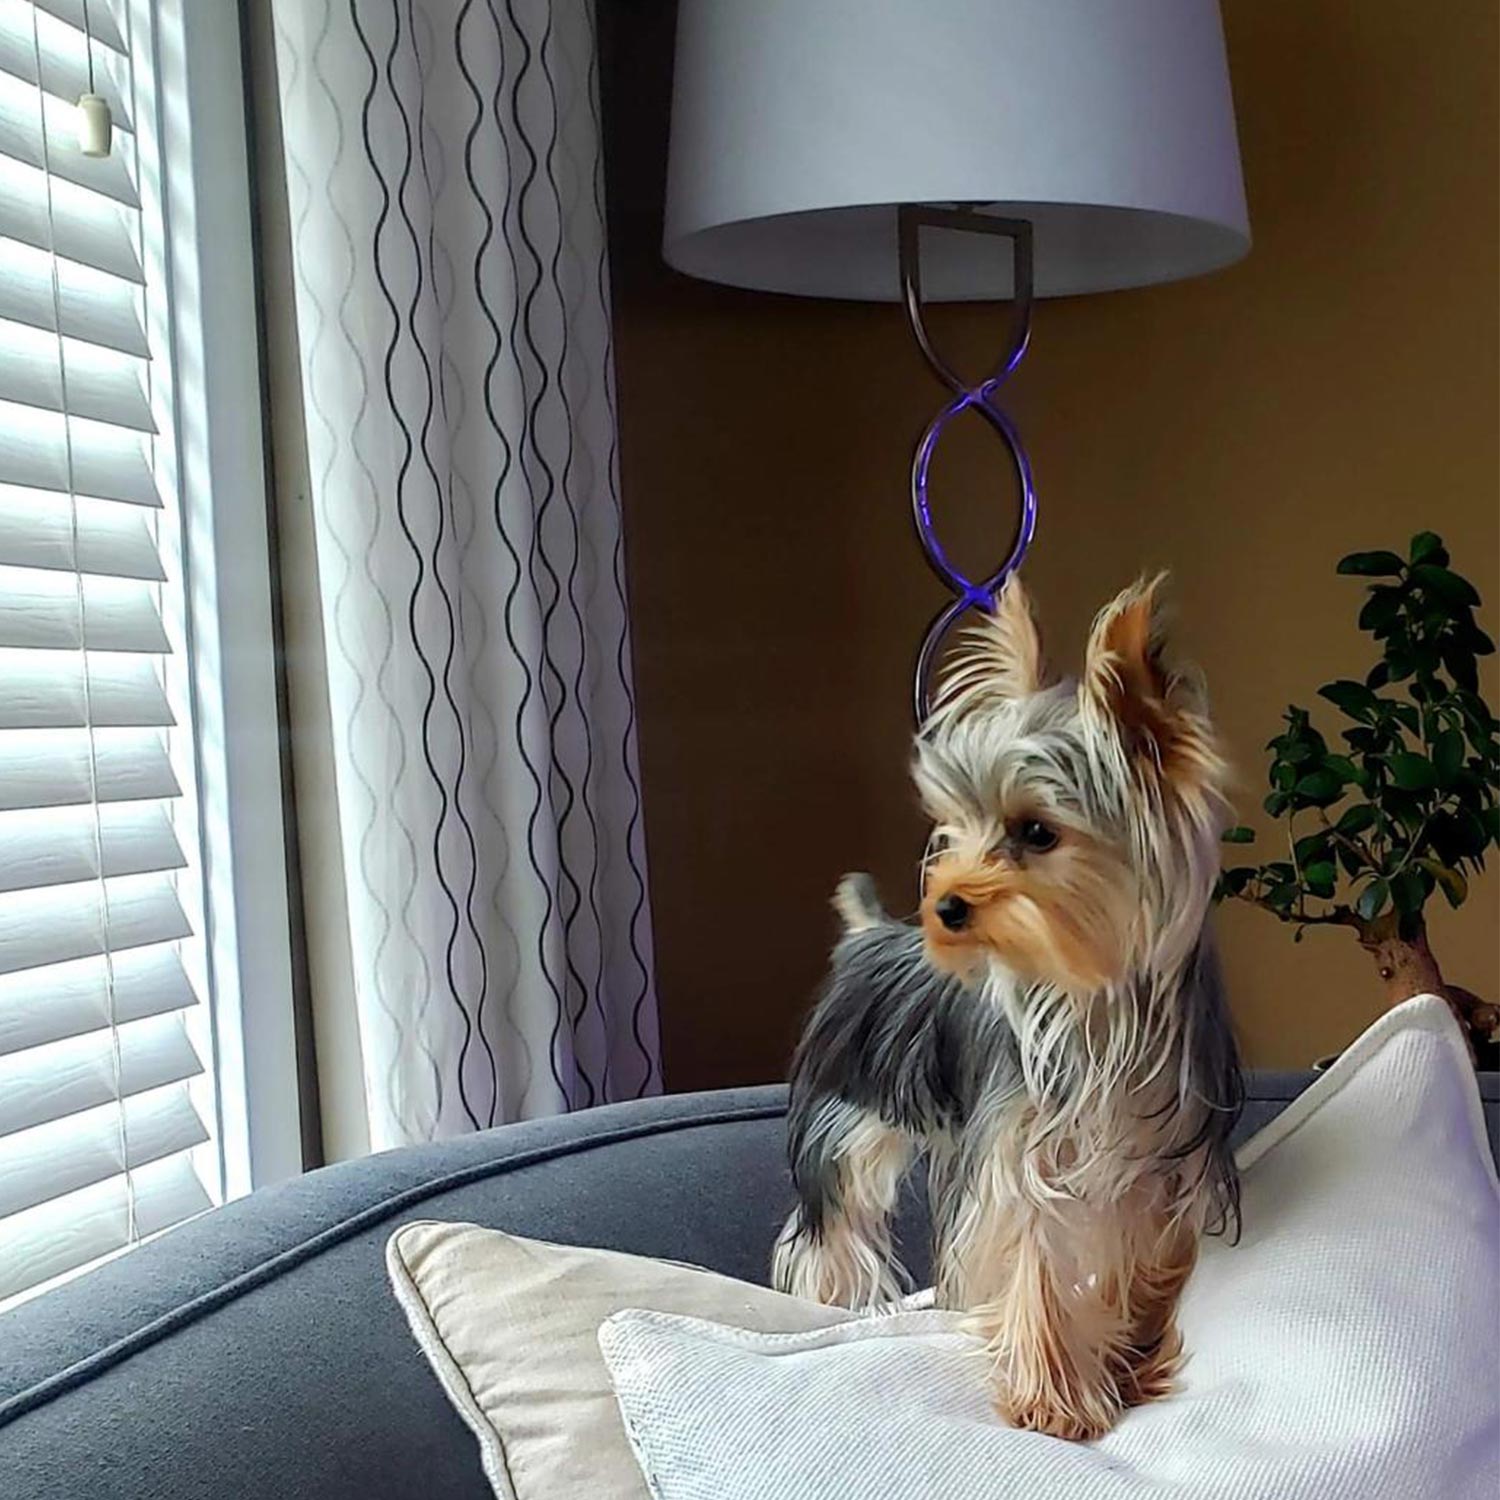 Daniel c Sent a picture of his stunning one year old yorkshire terrier pancho on the couch his favorite spot looking out the window